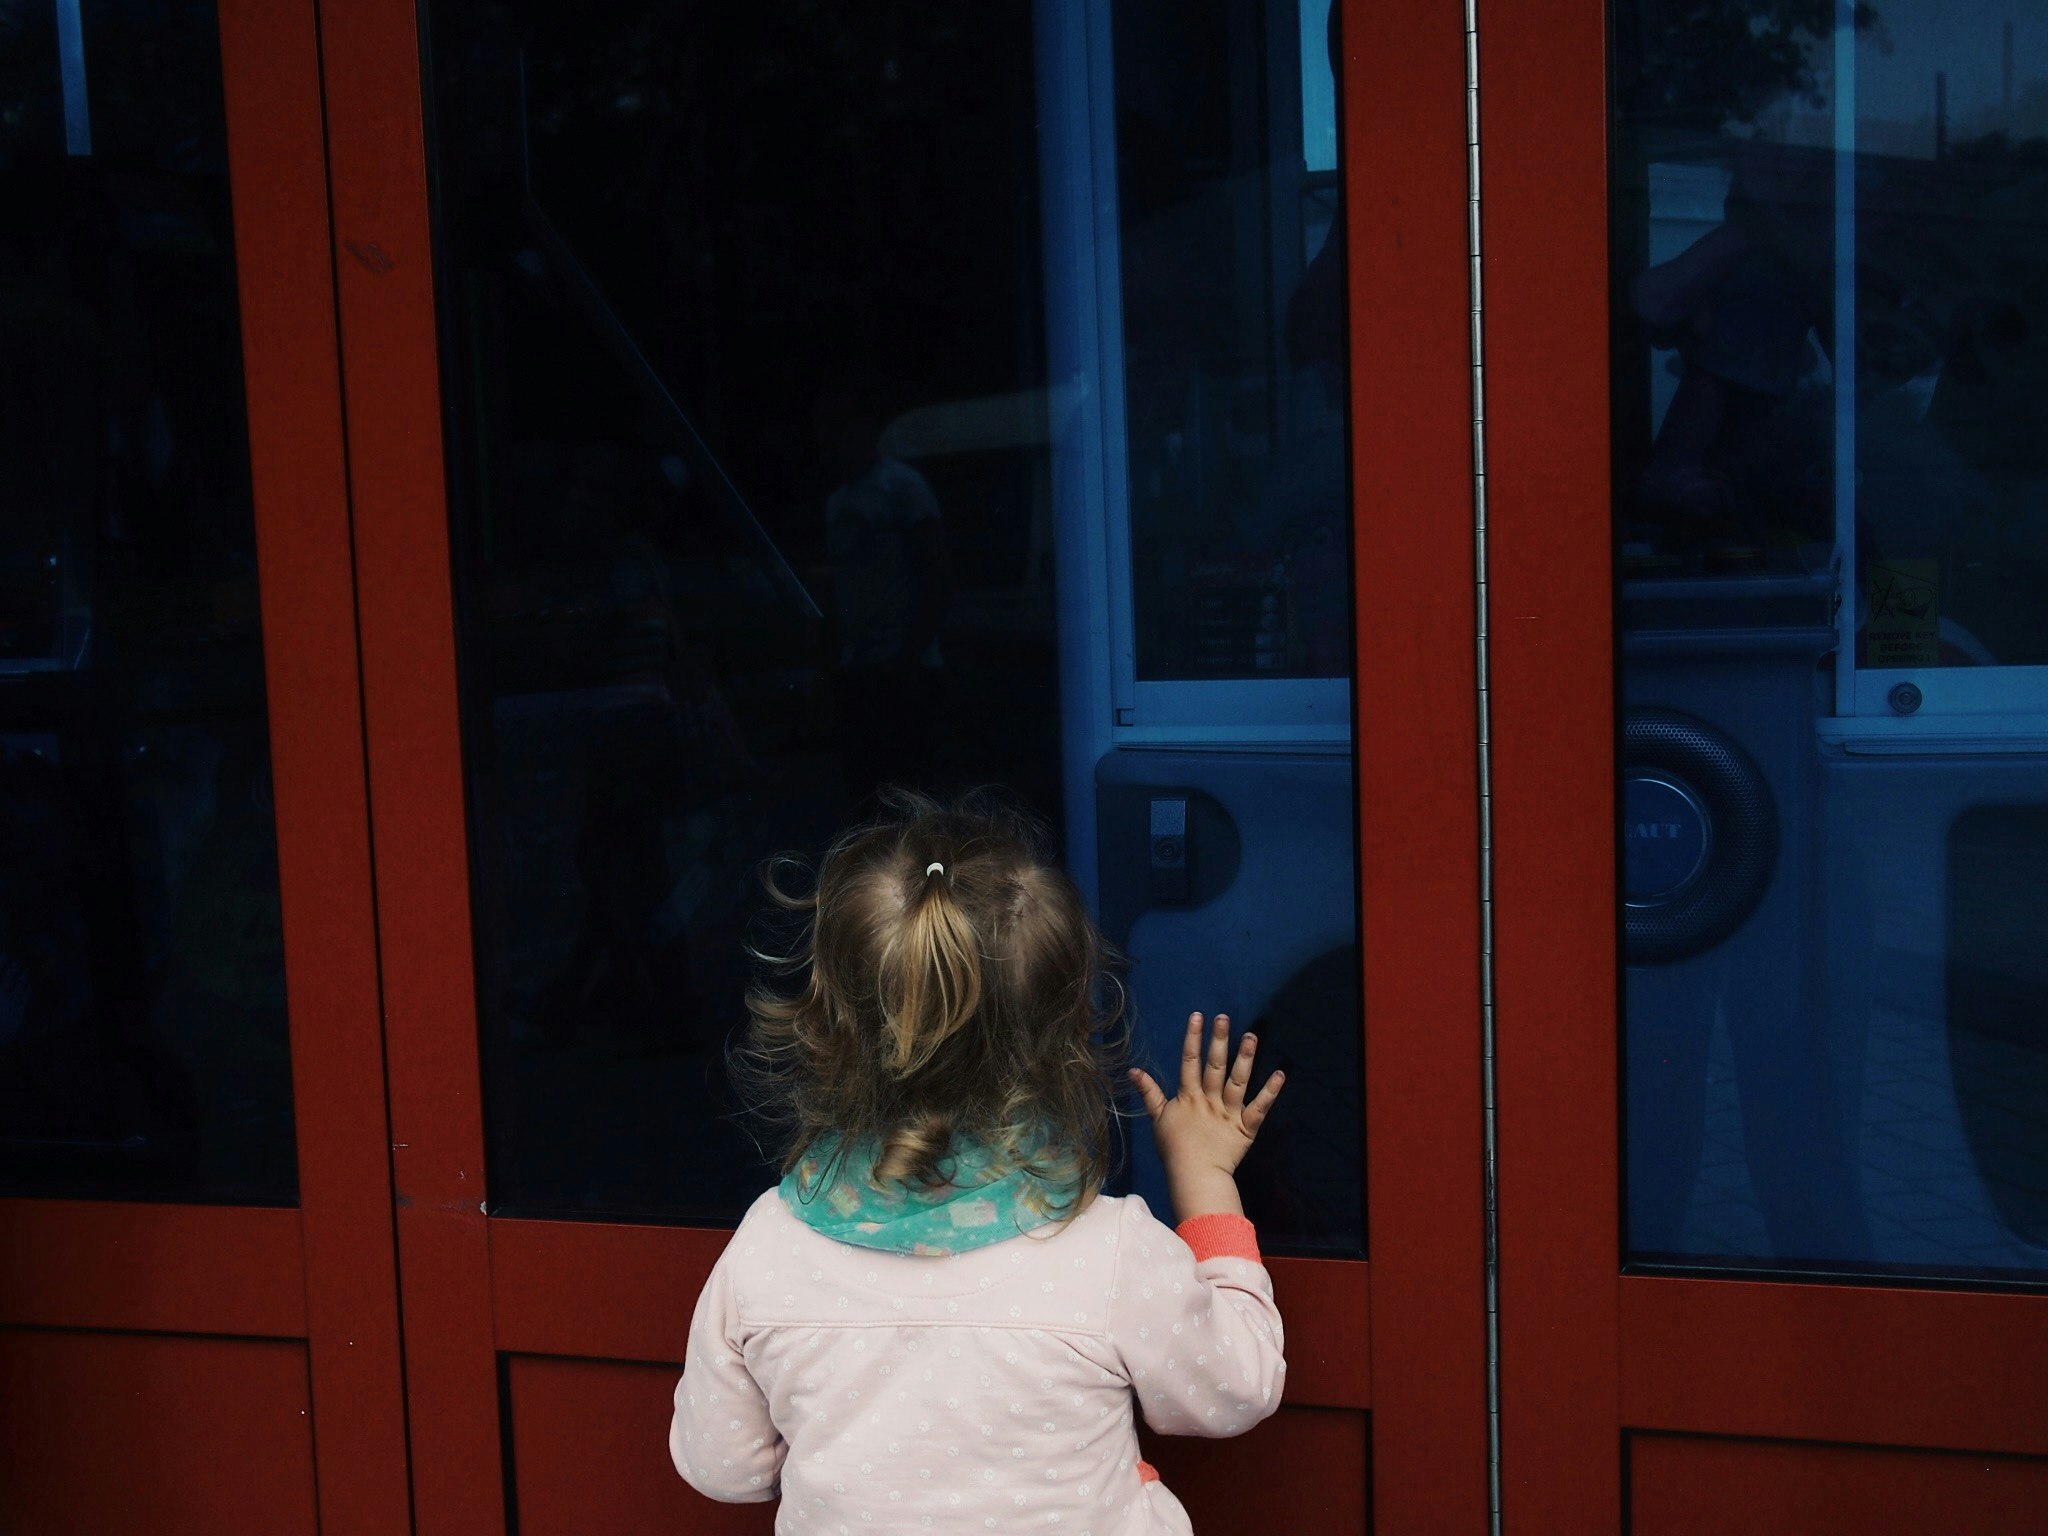 The little girl that wants to go inside.